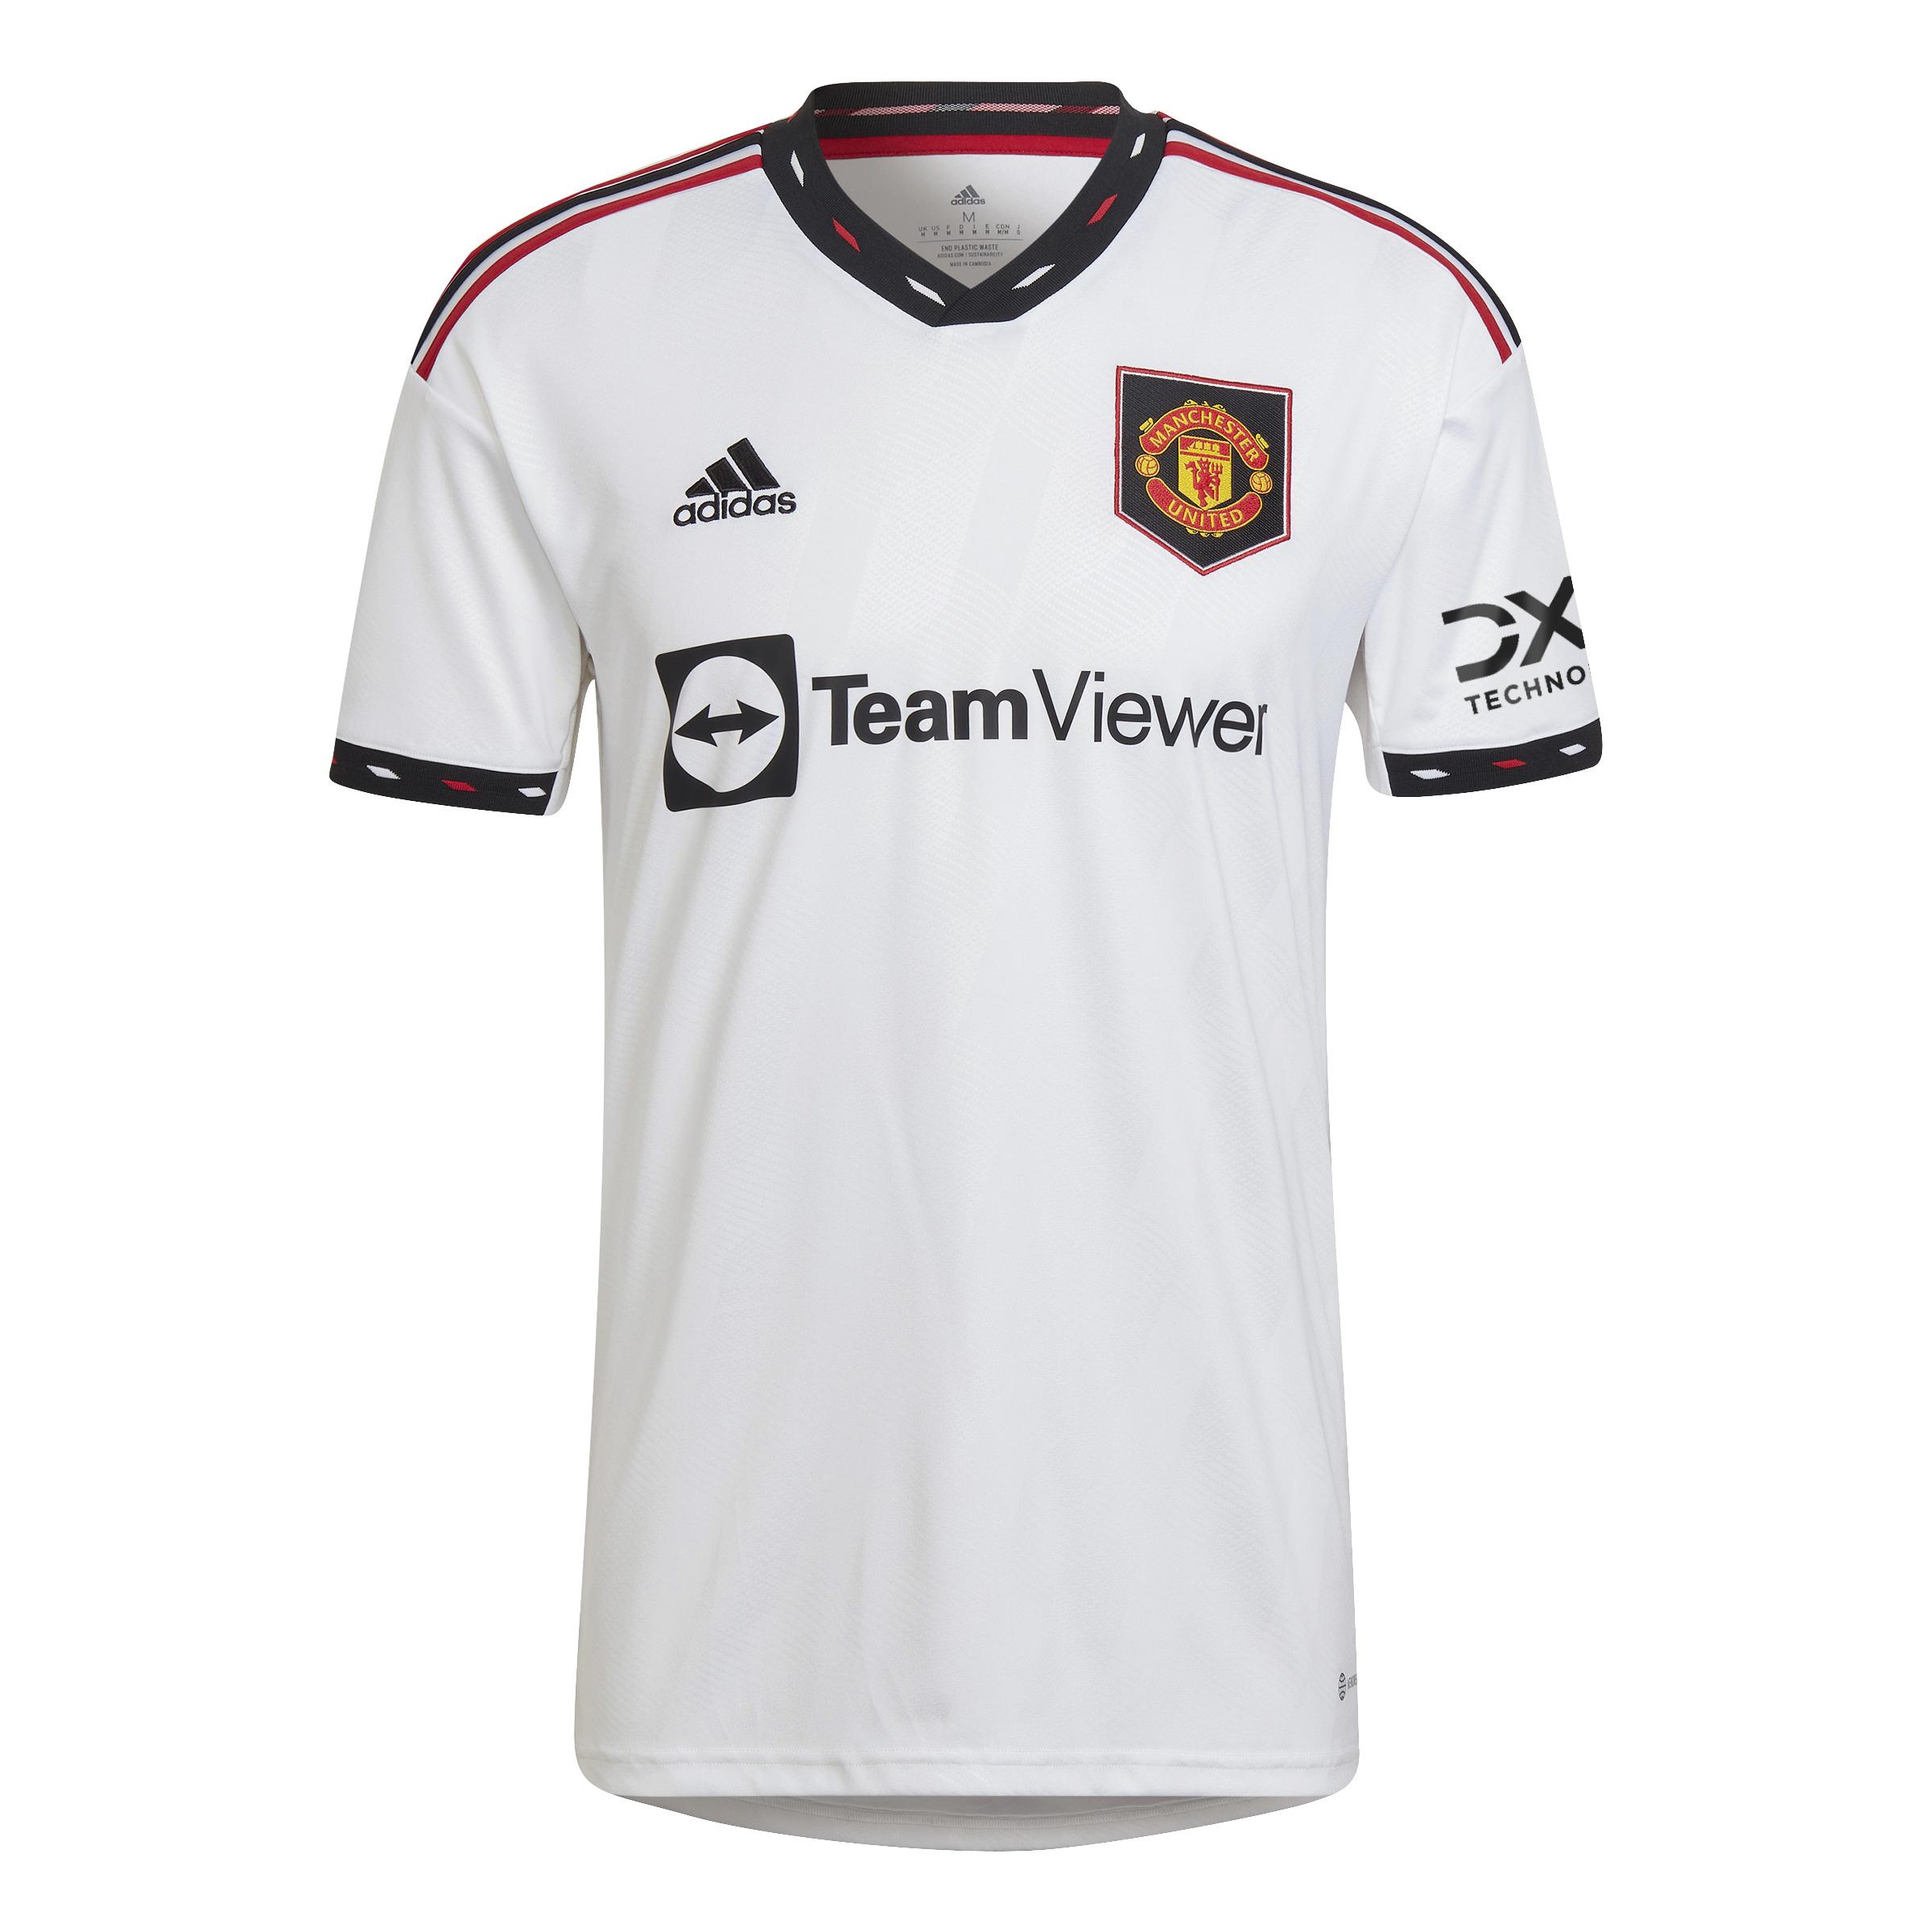 Adidas Jersey Away Manchester United   22/23